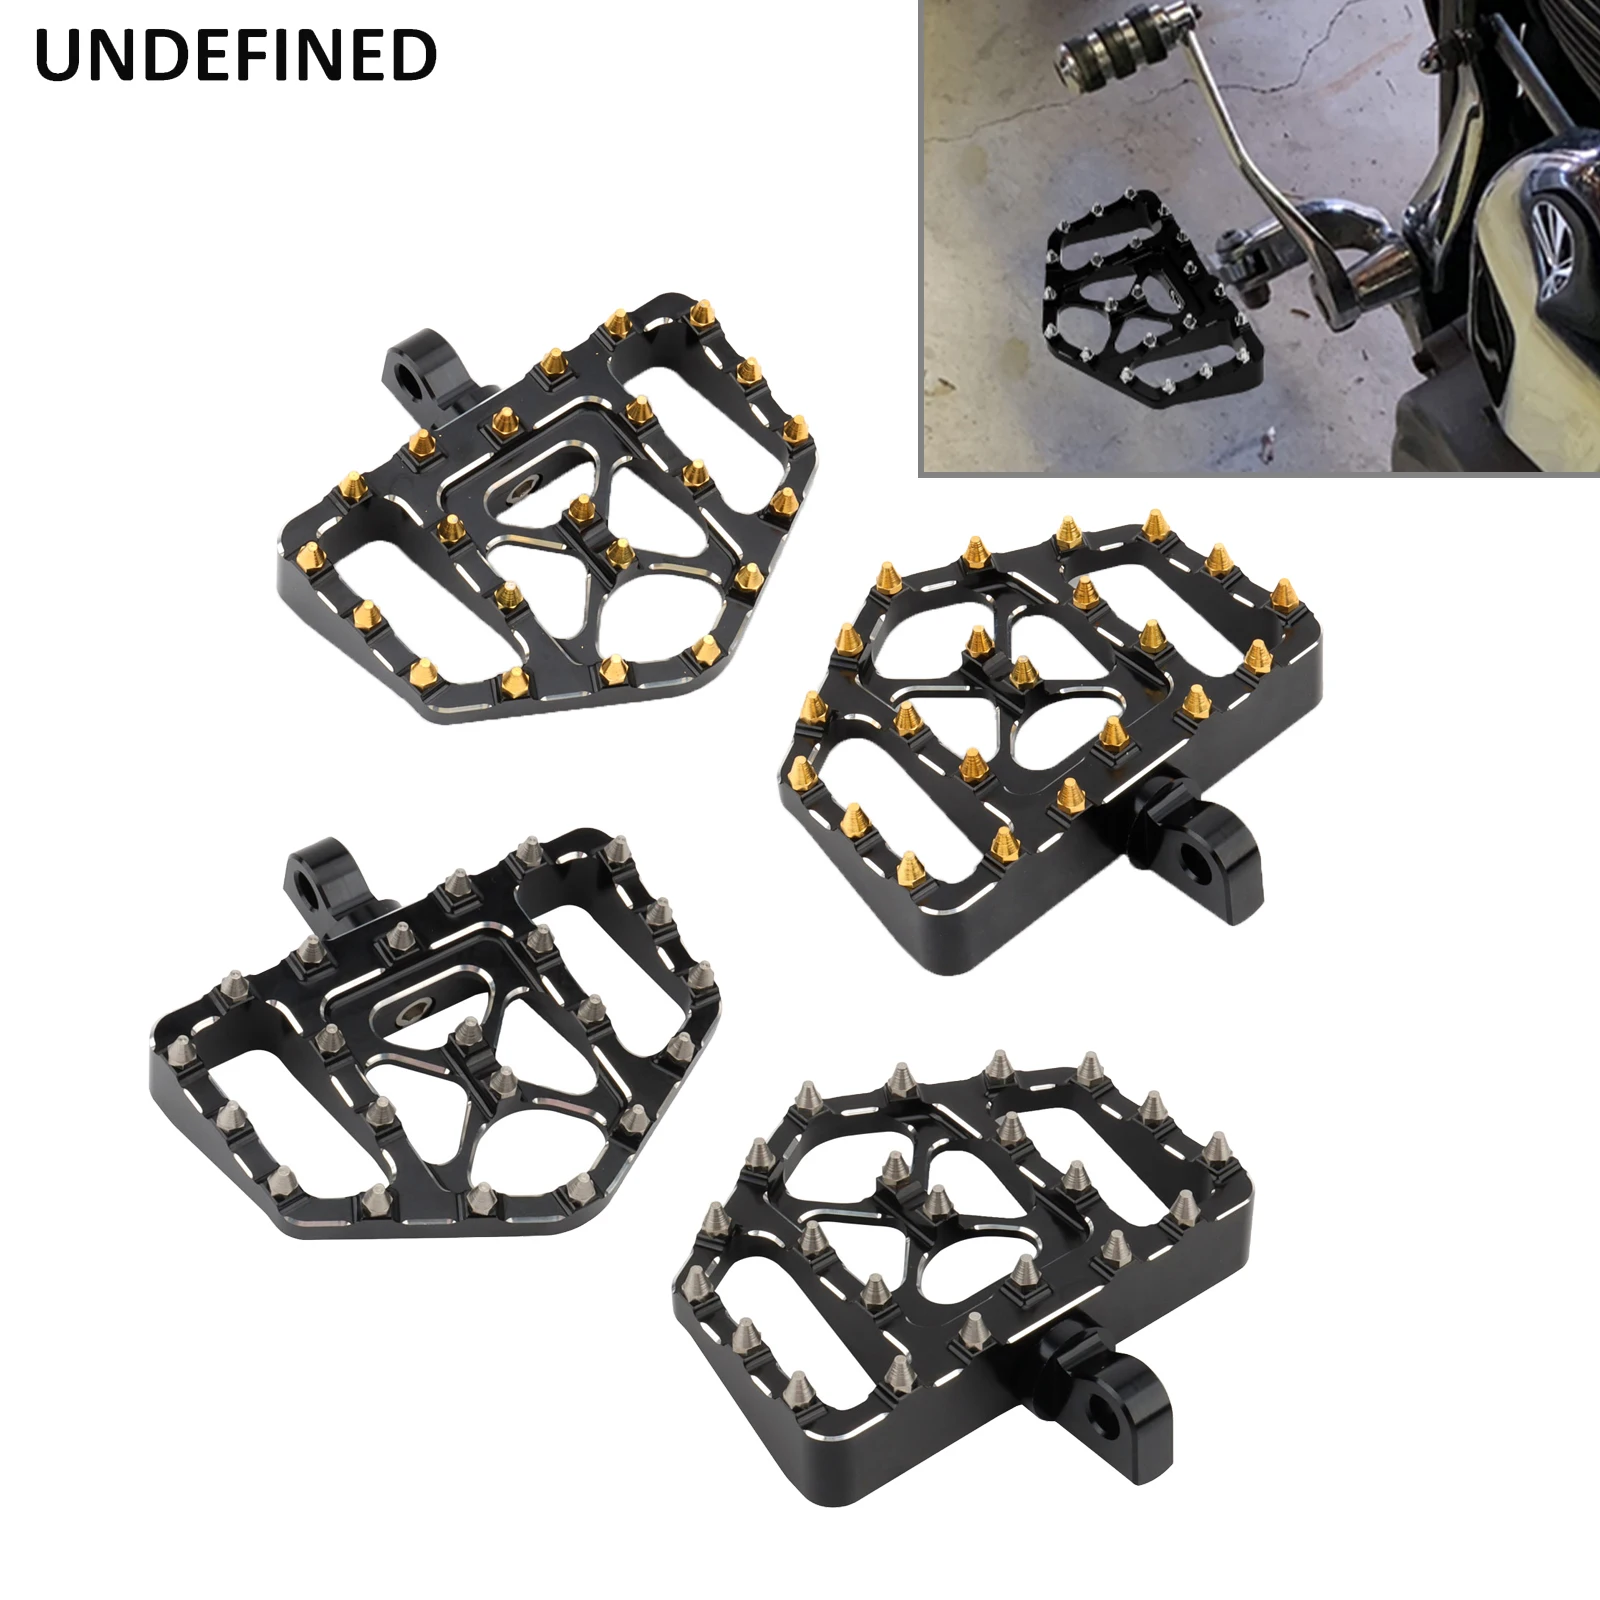 Motorcycle Wide Fat Foot Pegs MX Offroad Floorboard Footrests Pedals For Harley Sportster XL Dyna FXDF Softail Fatboy Touring enlarge